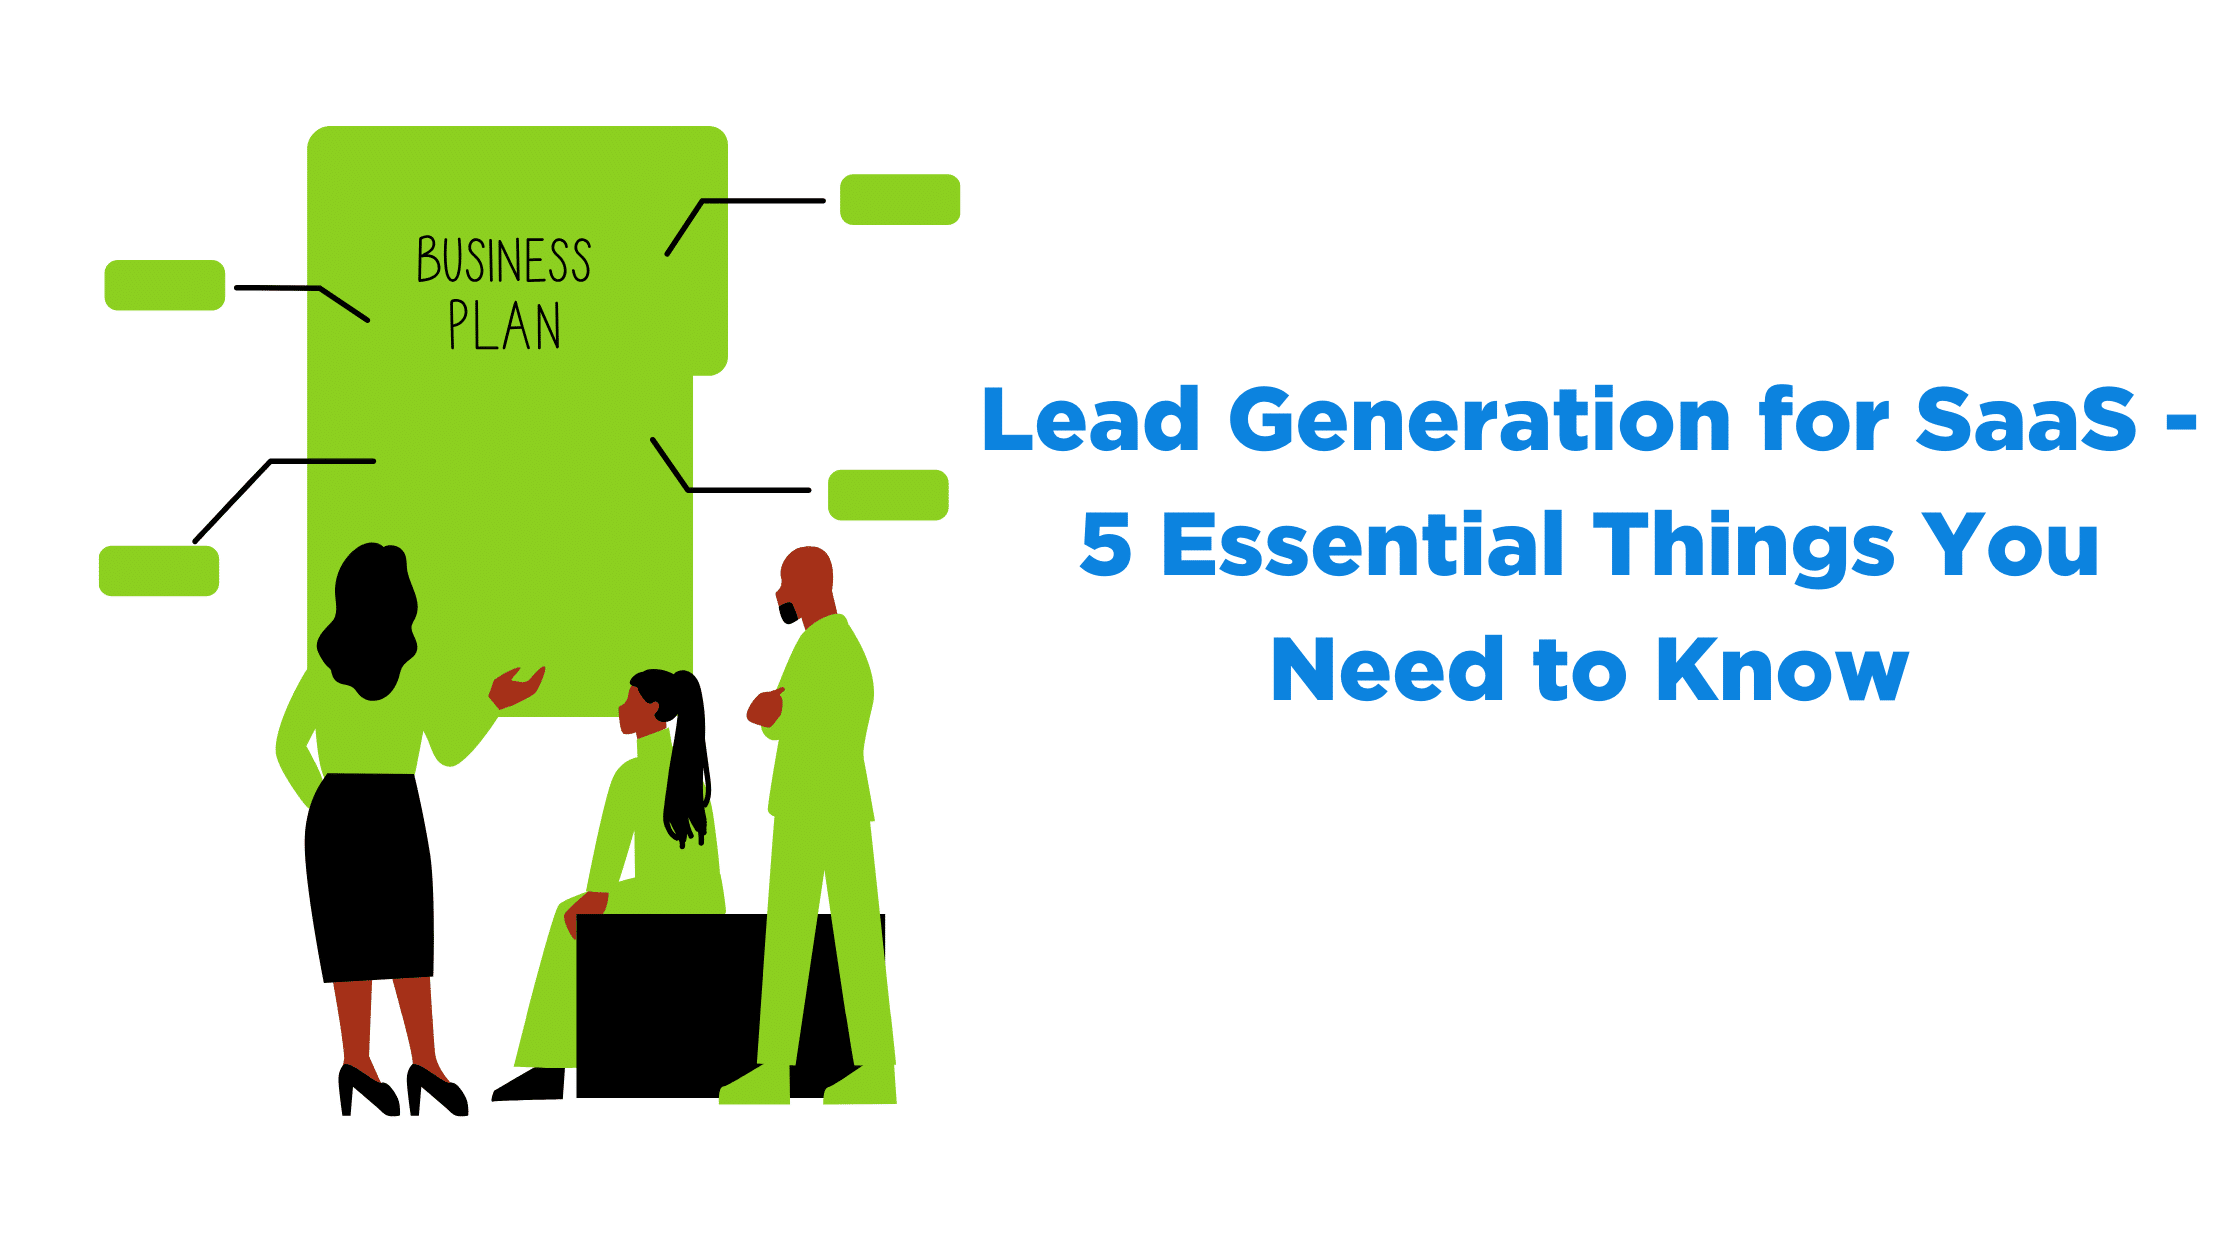 Lead Generation for SaaS